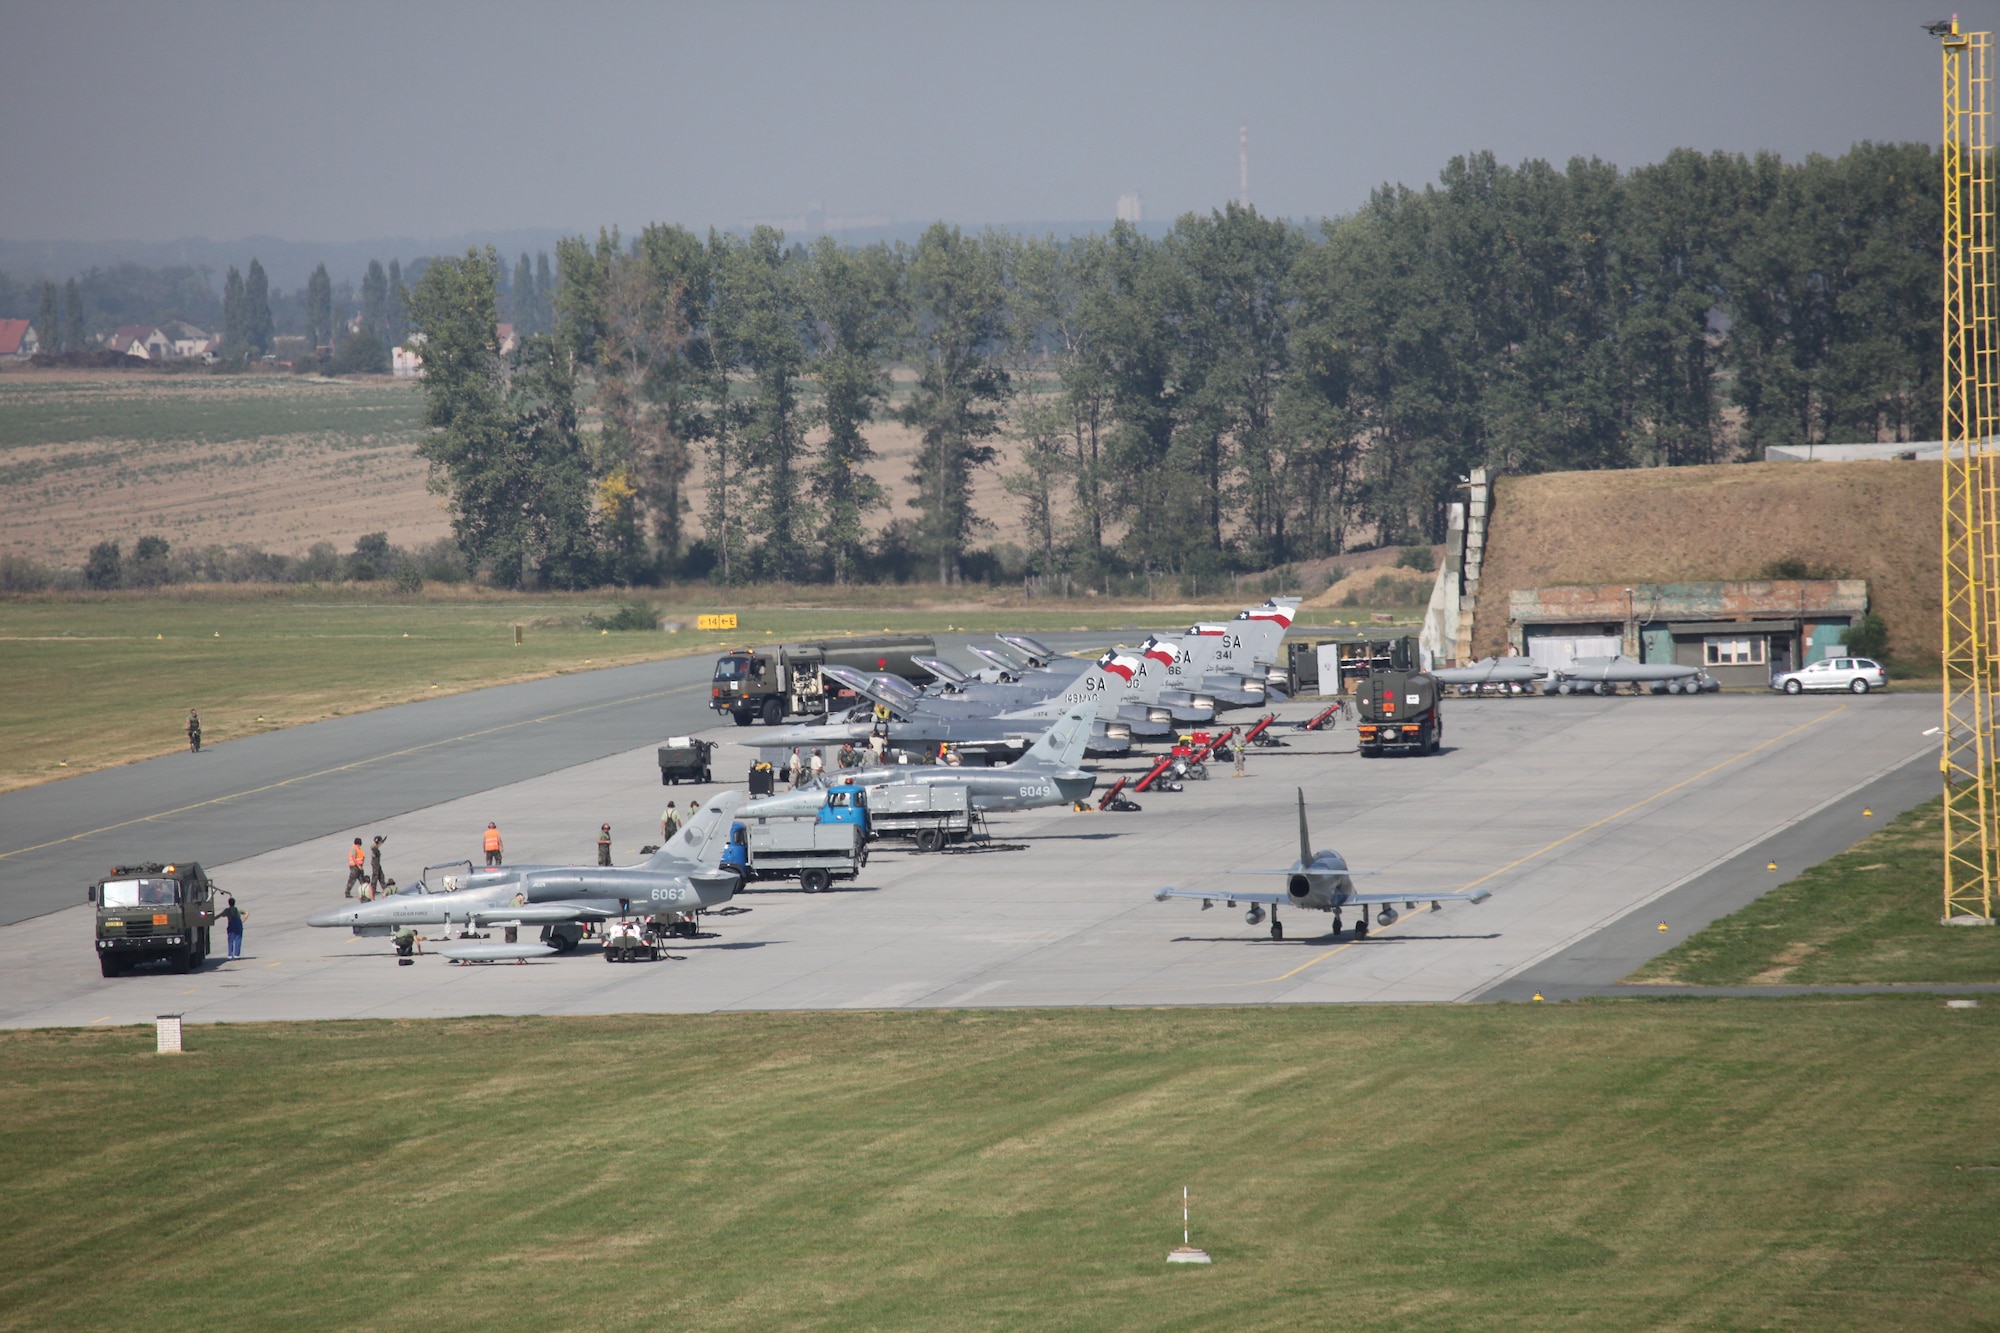 Czech Alcas and U.S. F-16s sit side-by-side on the ramp at Caslav Air Base.  Members of the Texas Air National Guard’s 149th Fighter Wing were in the Czech Republic conducting mutual training as part of the National Guard’s state partnership program.  (U.S. Air Force photo by Senior Master Sgt Miguel Arellano)